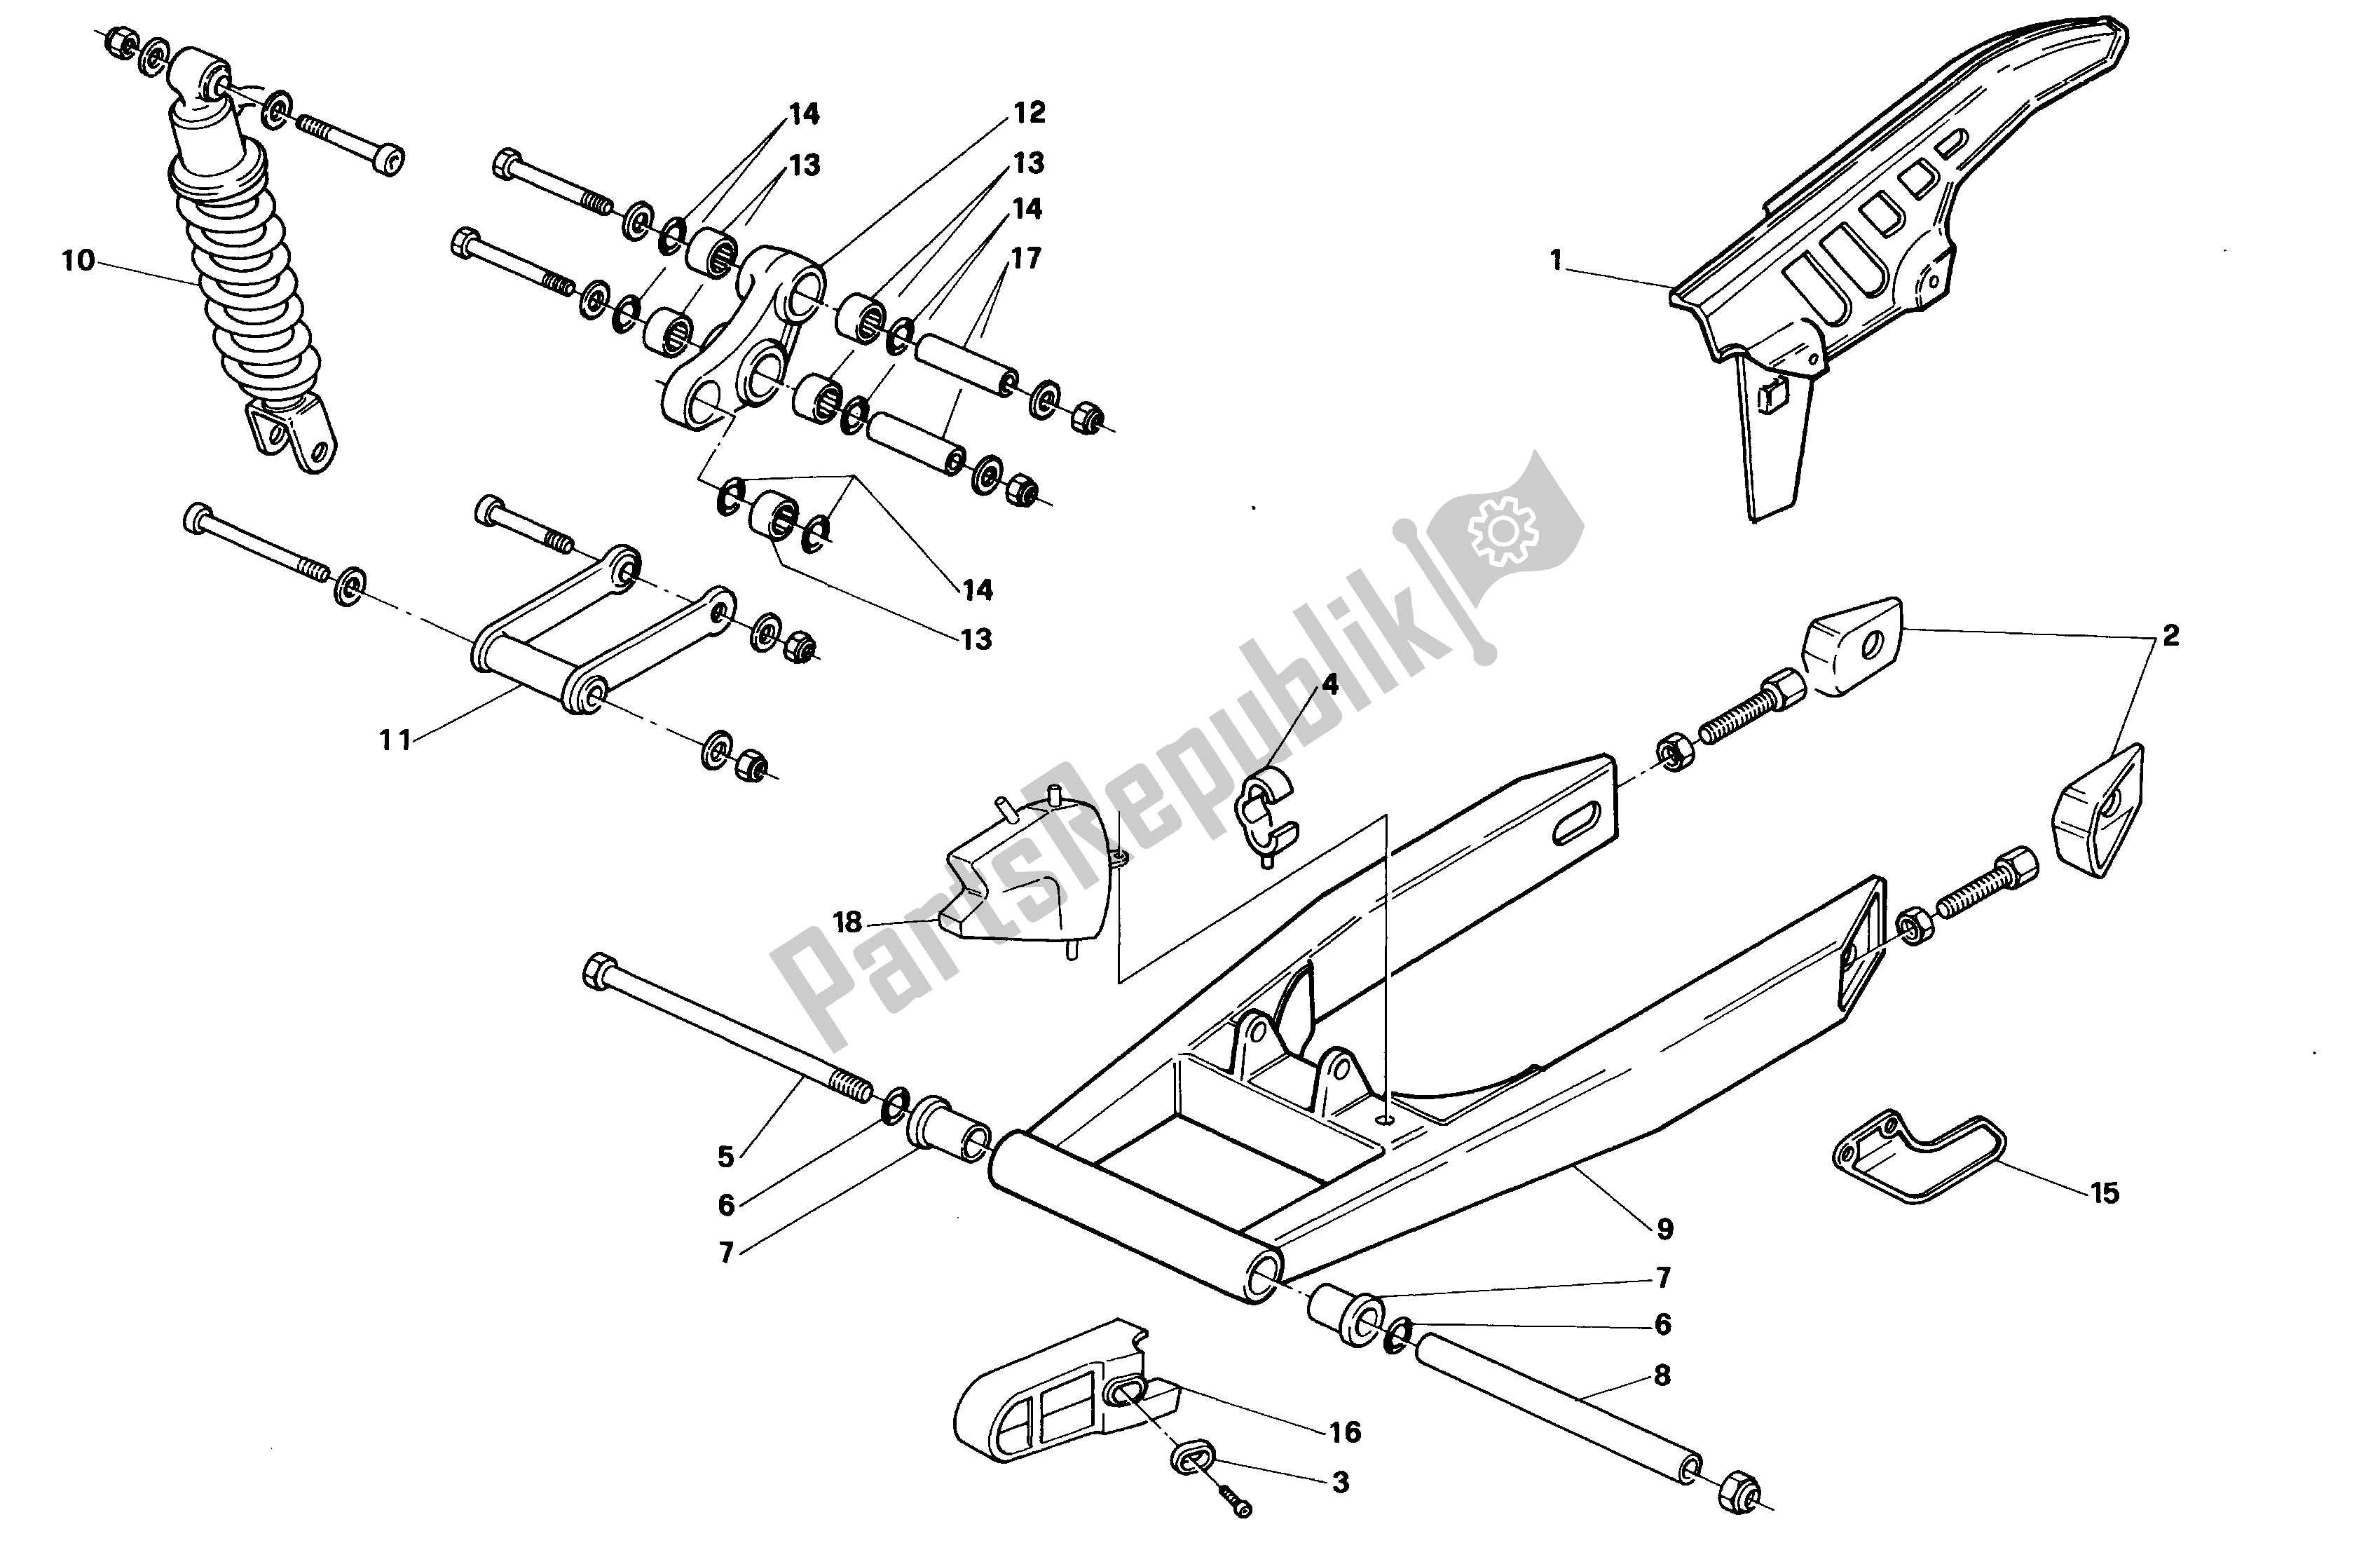 All parts for the Rear Fork And Suspension of the Aprilia Pegaso 50 1992